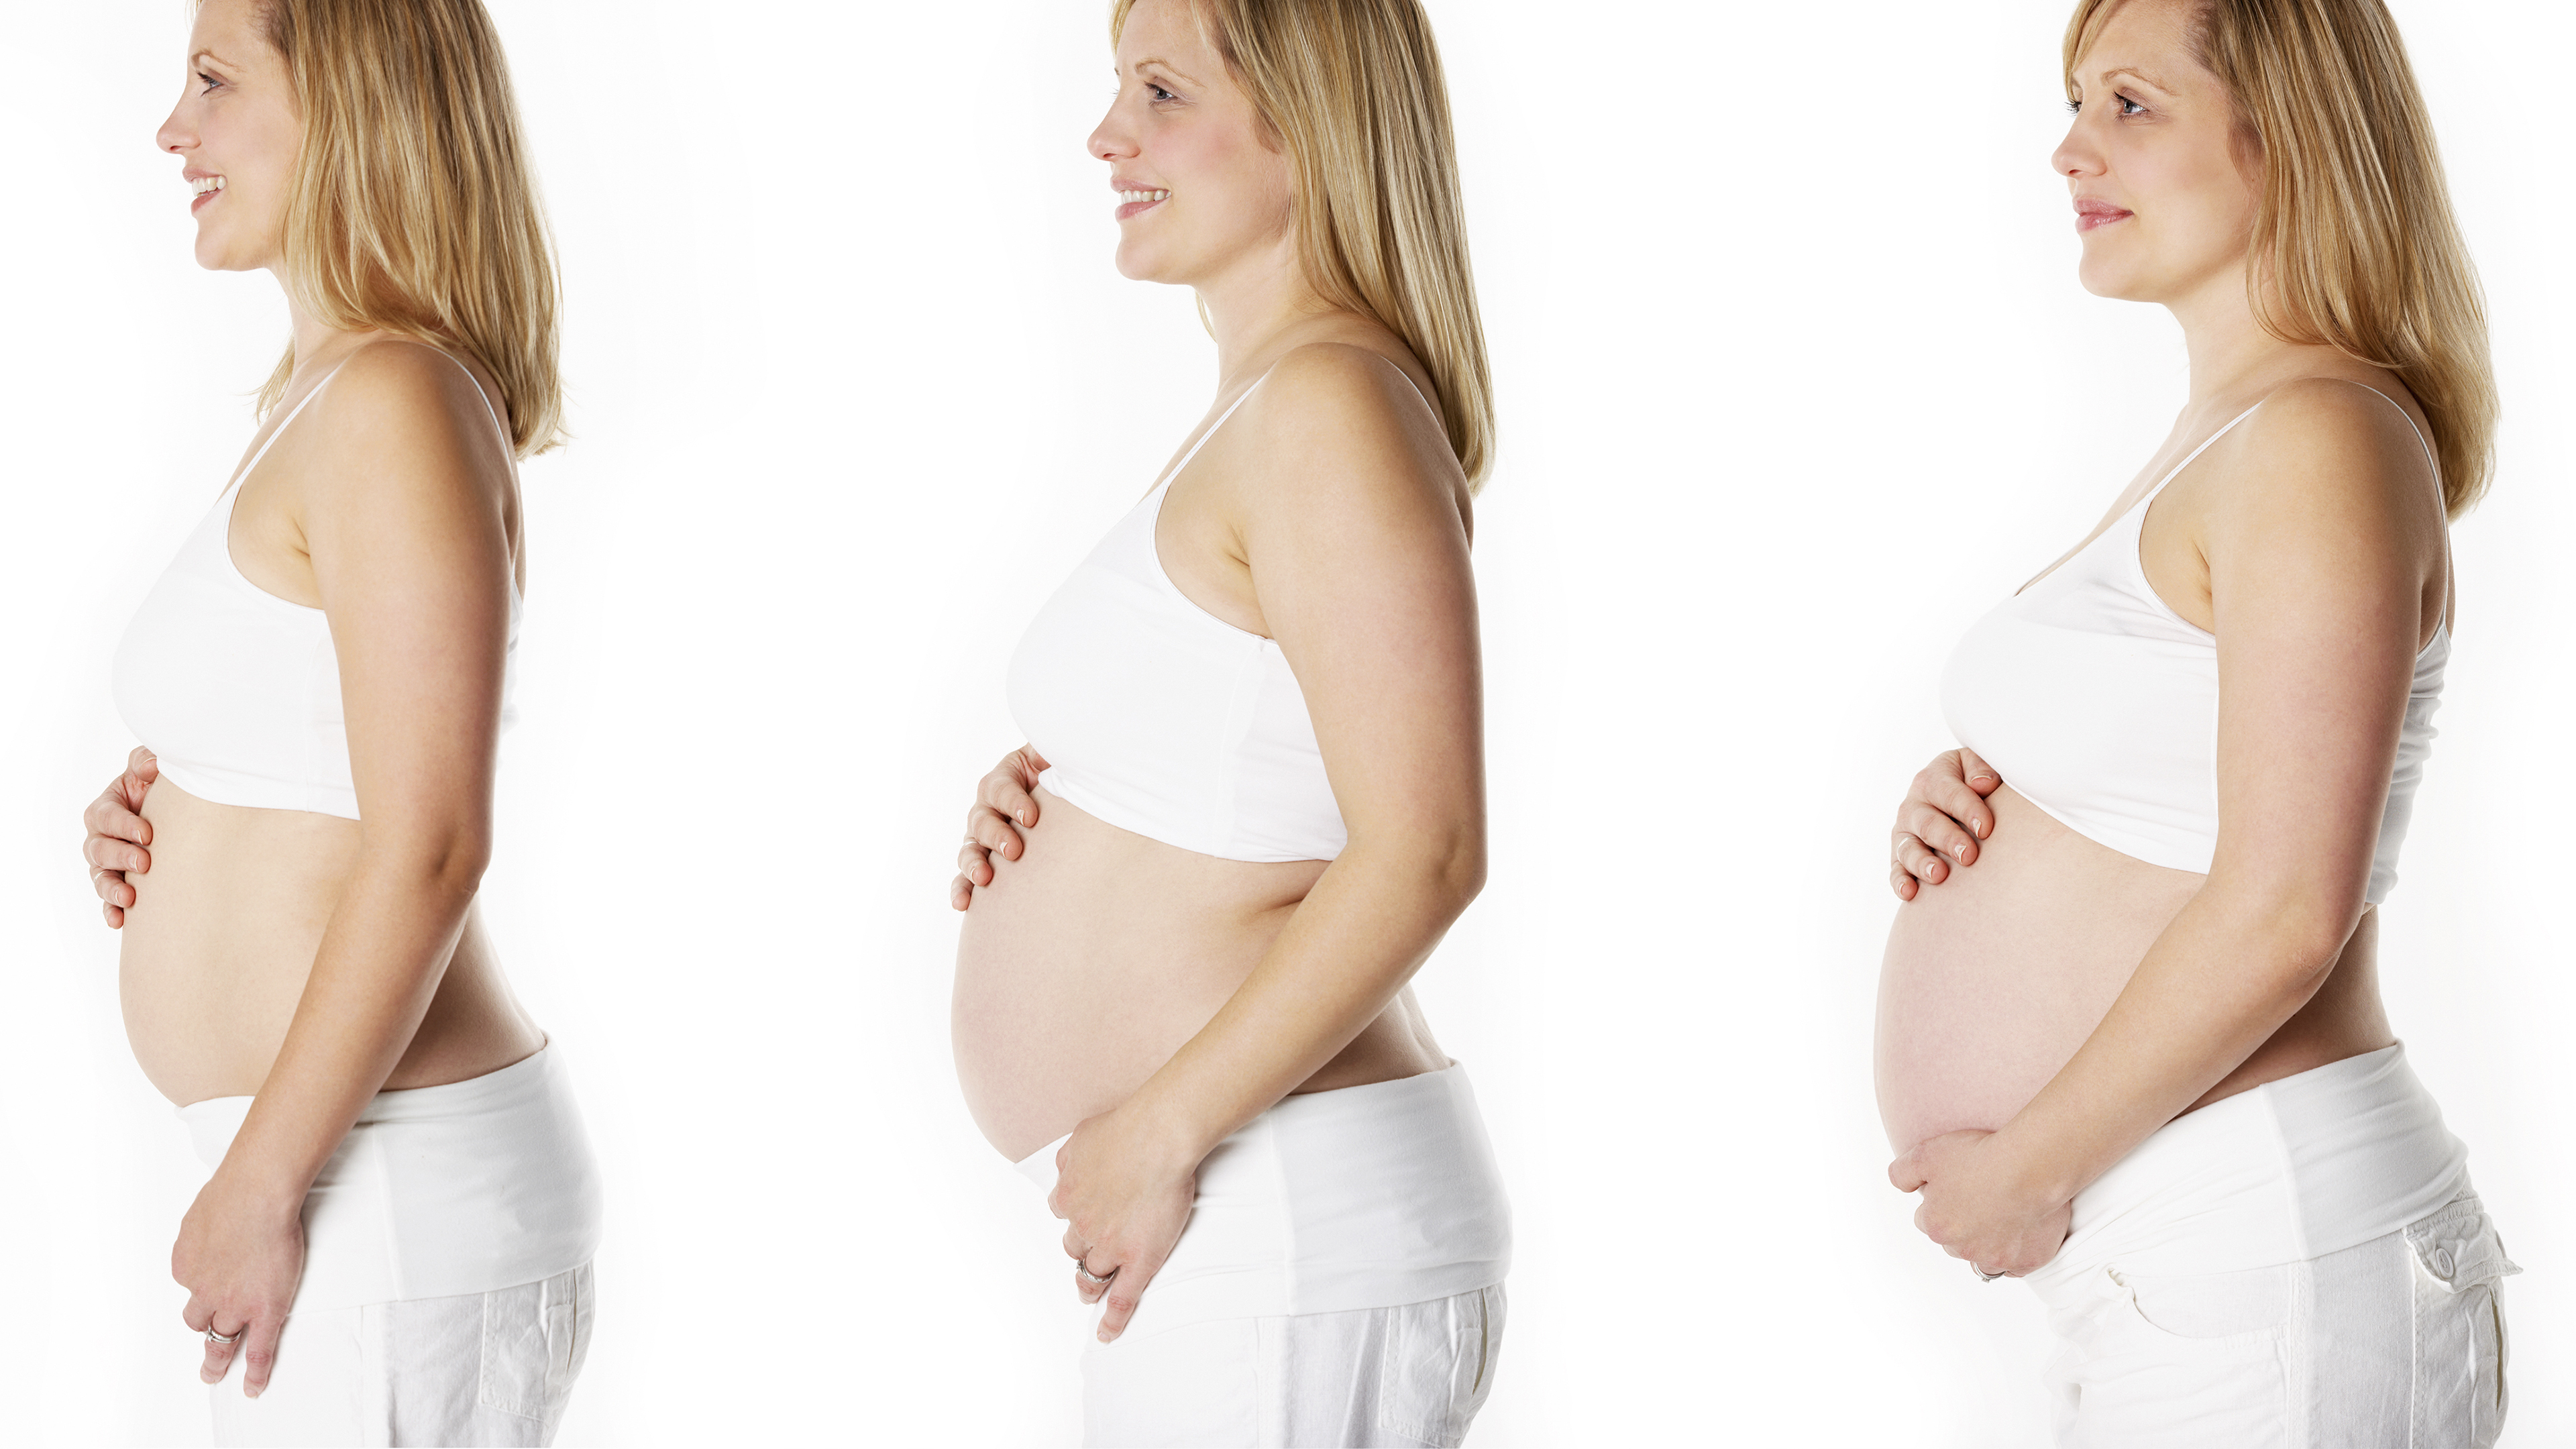 Pregnancy Weeks to Months: How to Do the Math Accurately